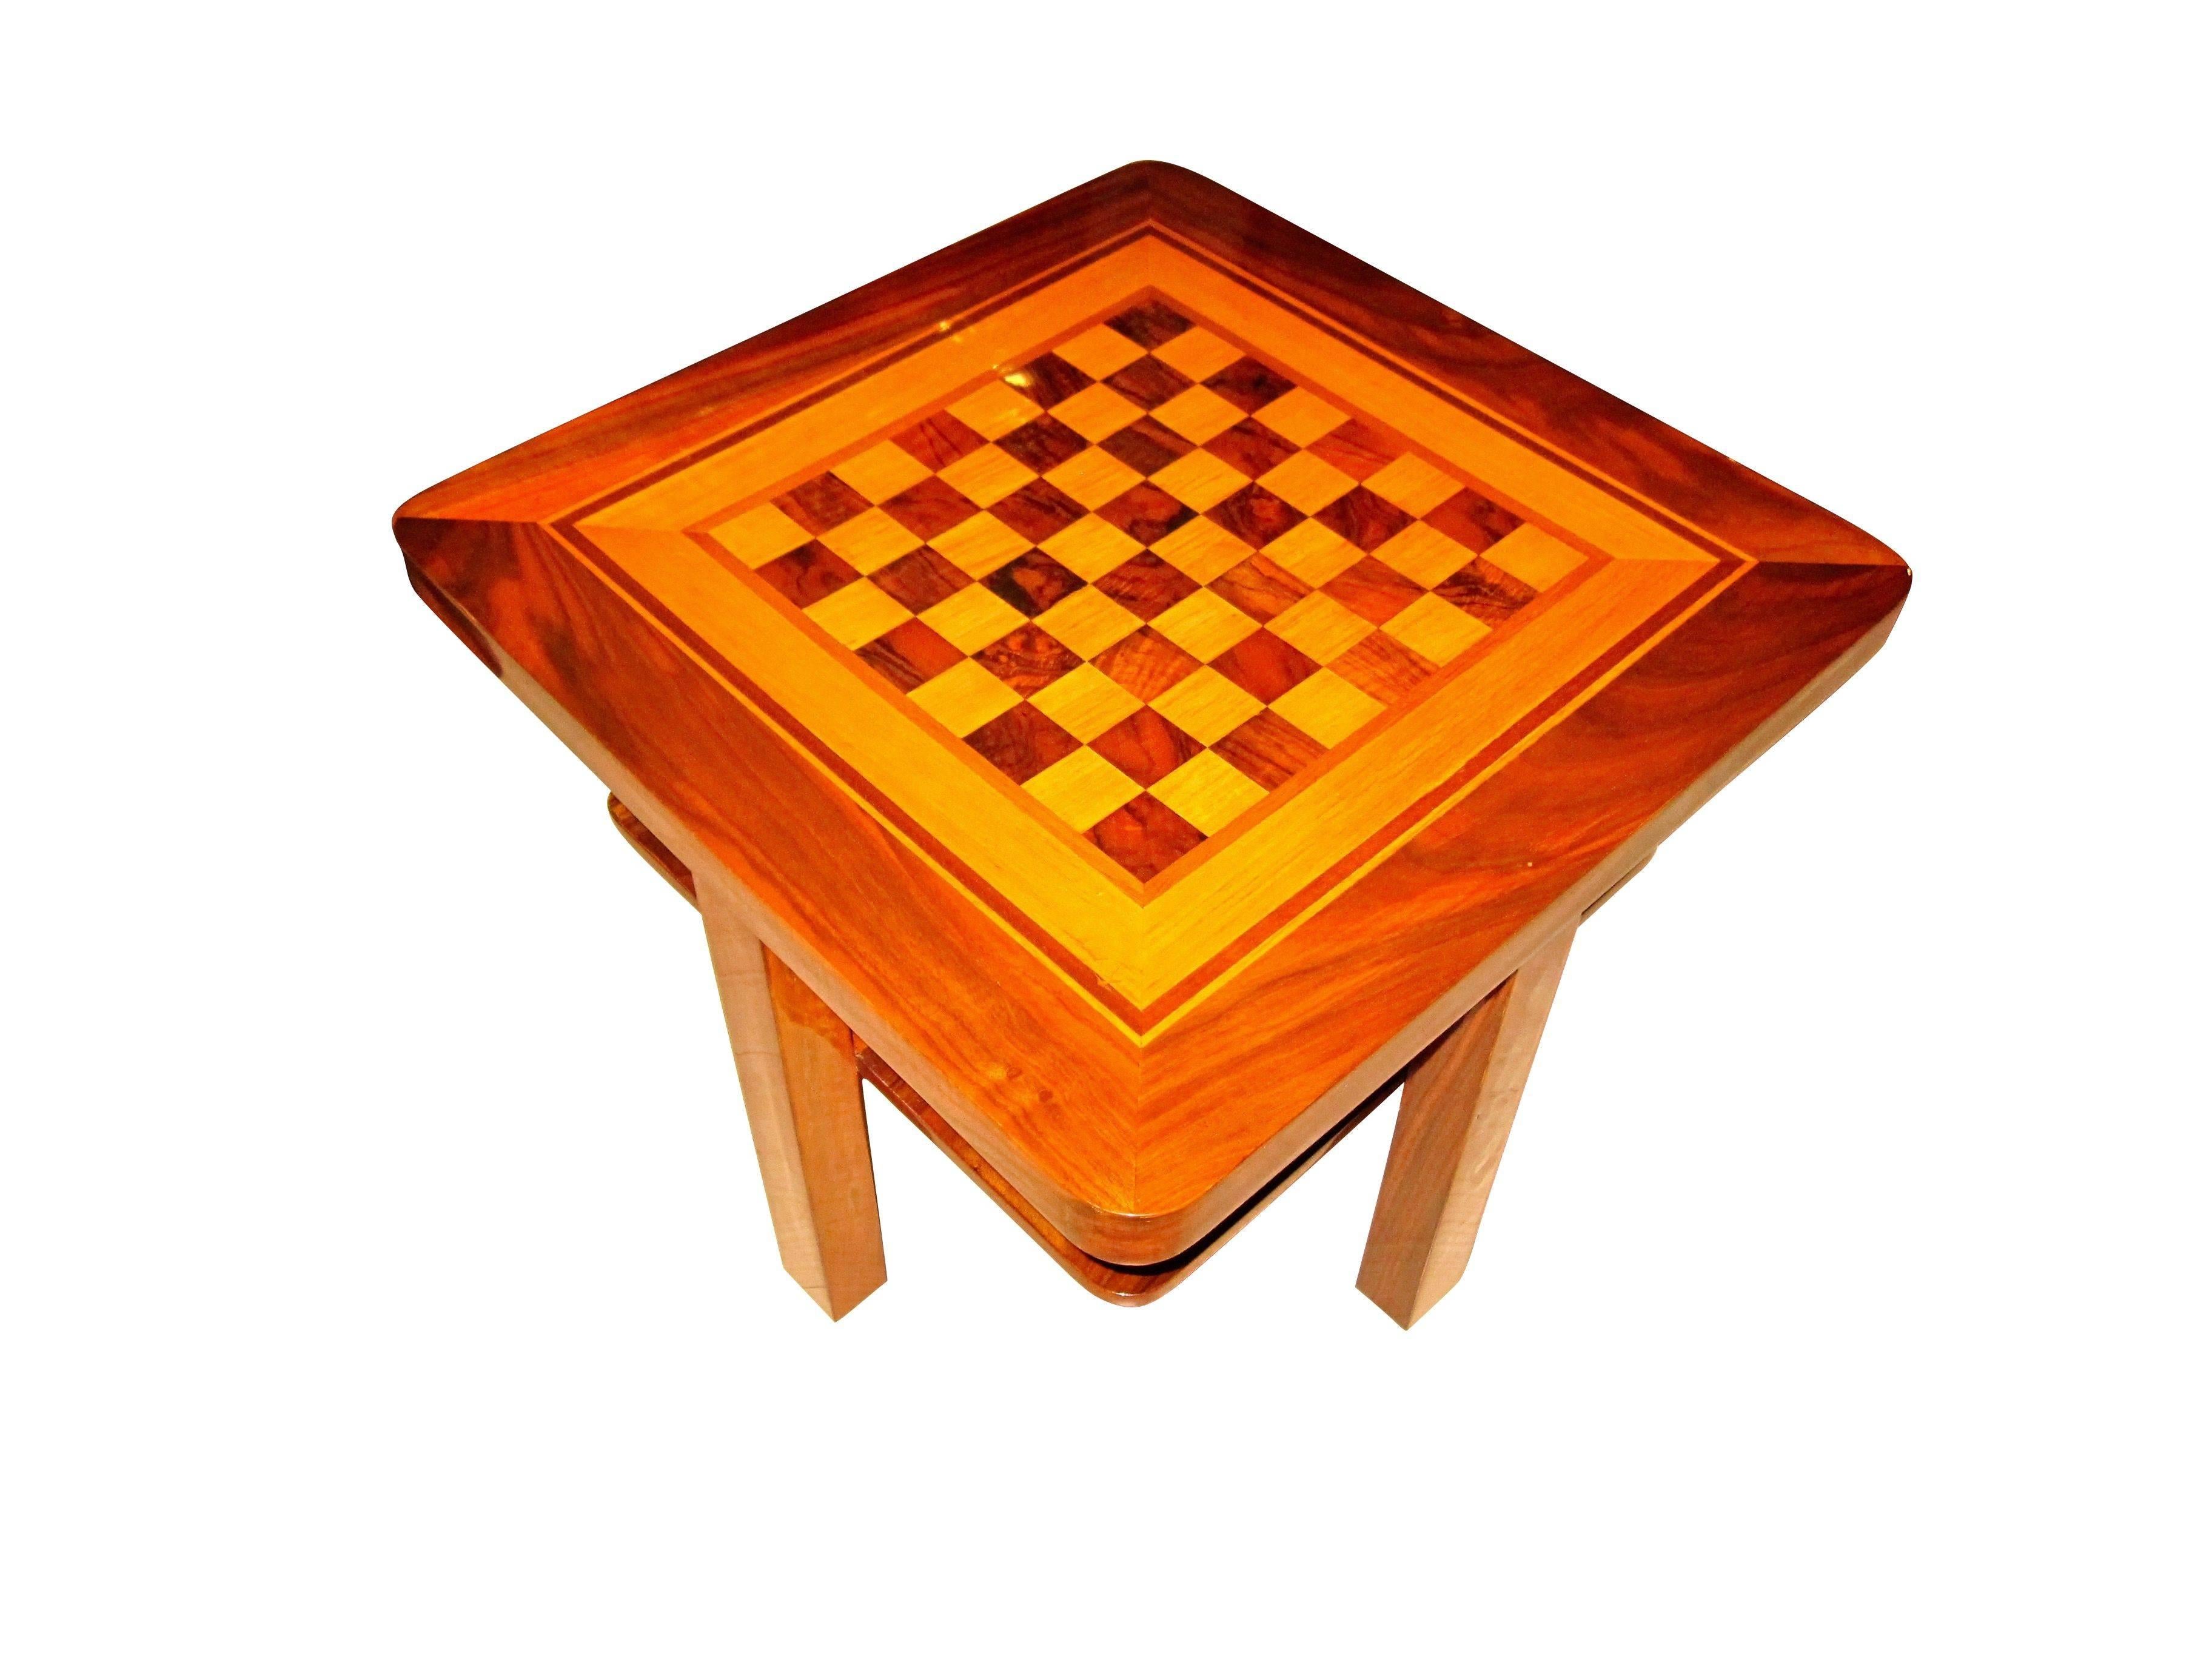 Bauhaus Chess table from eastern Germany around 1930. Walnut veneer and solid wood on the frame and inlays of maple and walnut on the plate. The table has rounded edges and one floor underneath the chess field. It has been hand-polished with shellac.